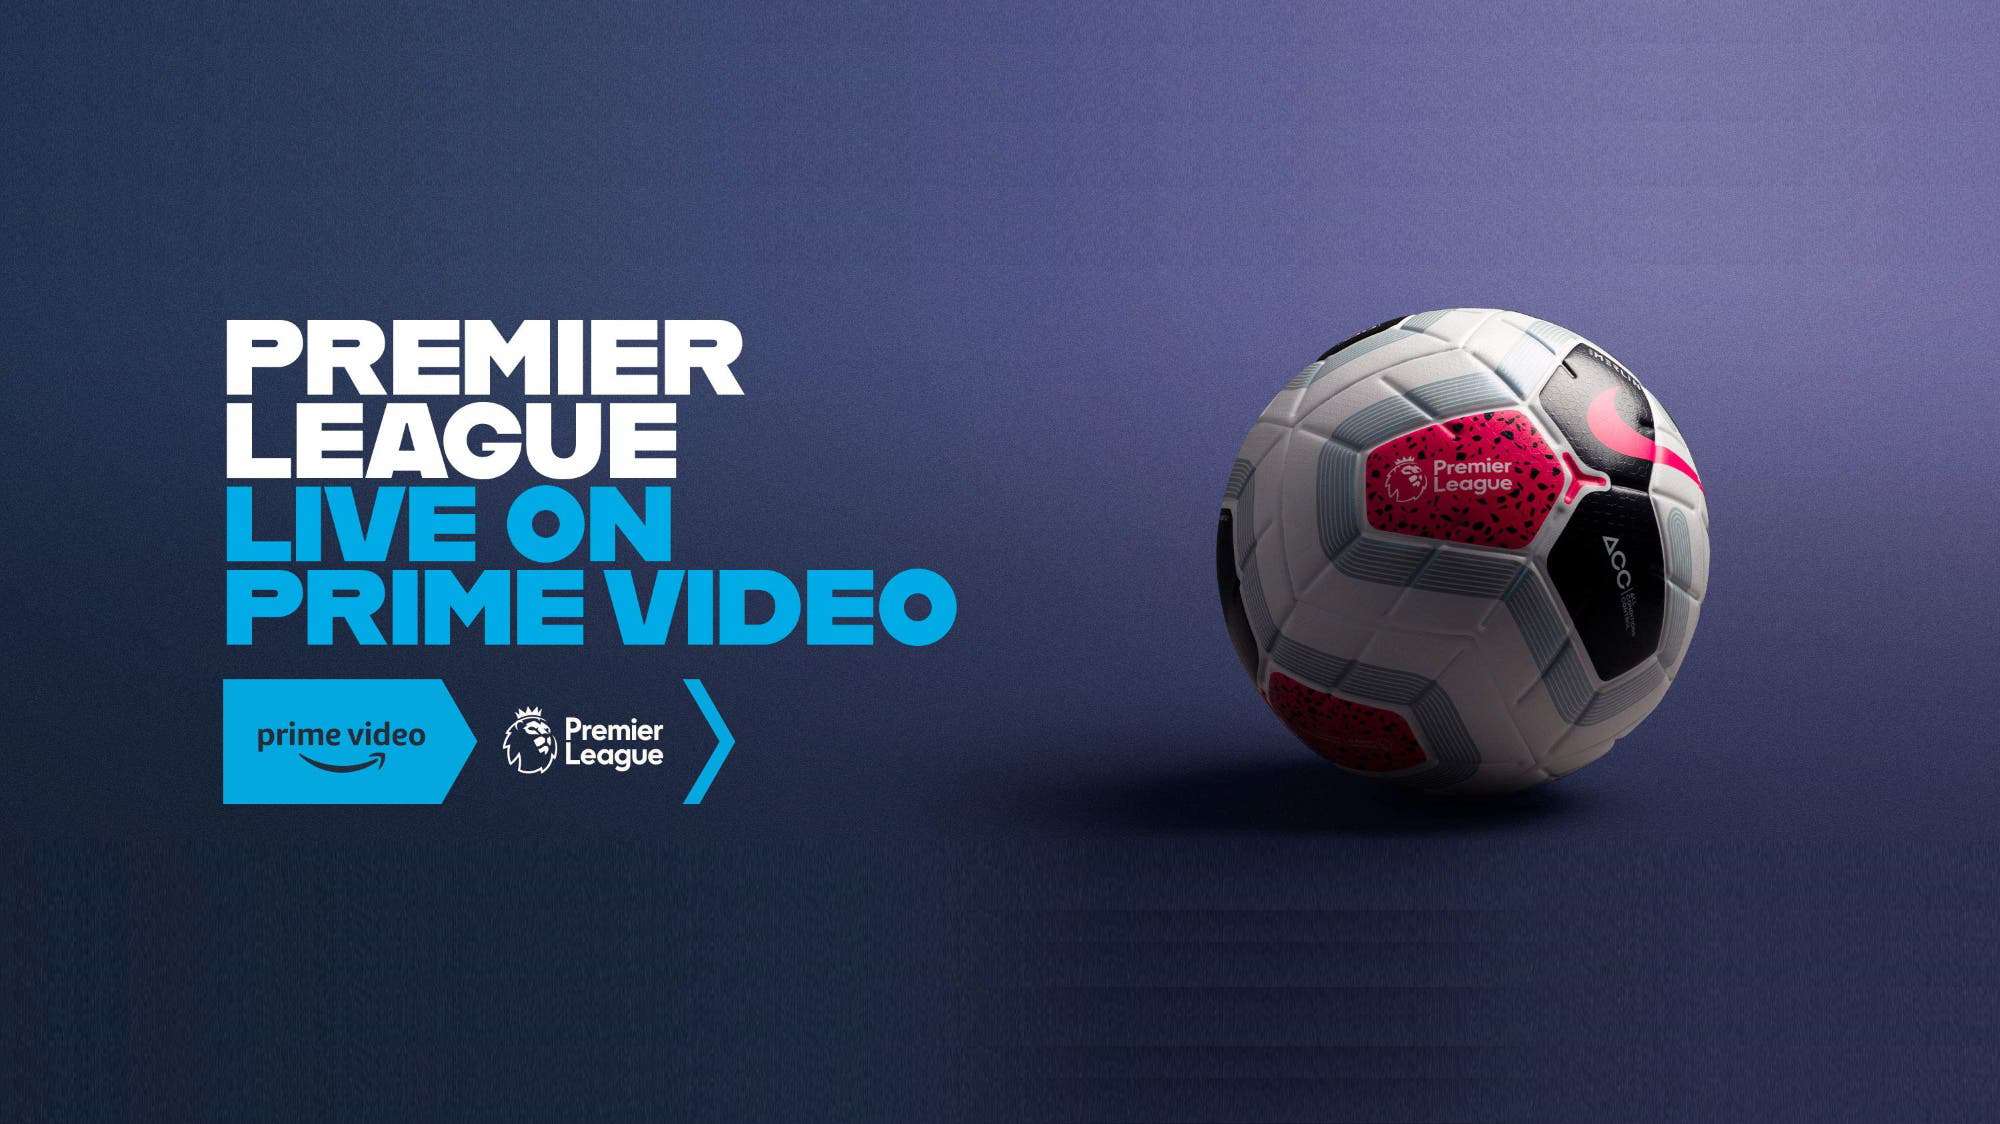 Amazon Prime Video to live stream Premier League for free in the UK -  